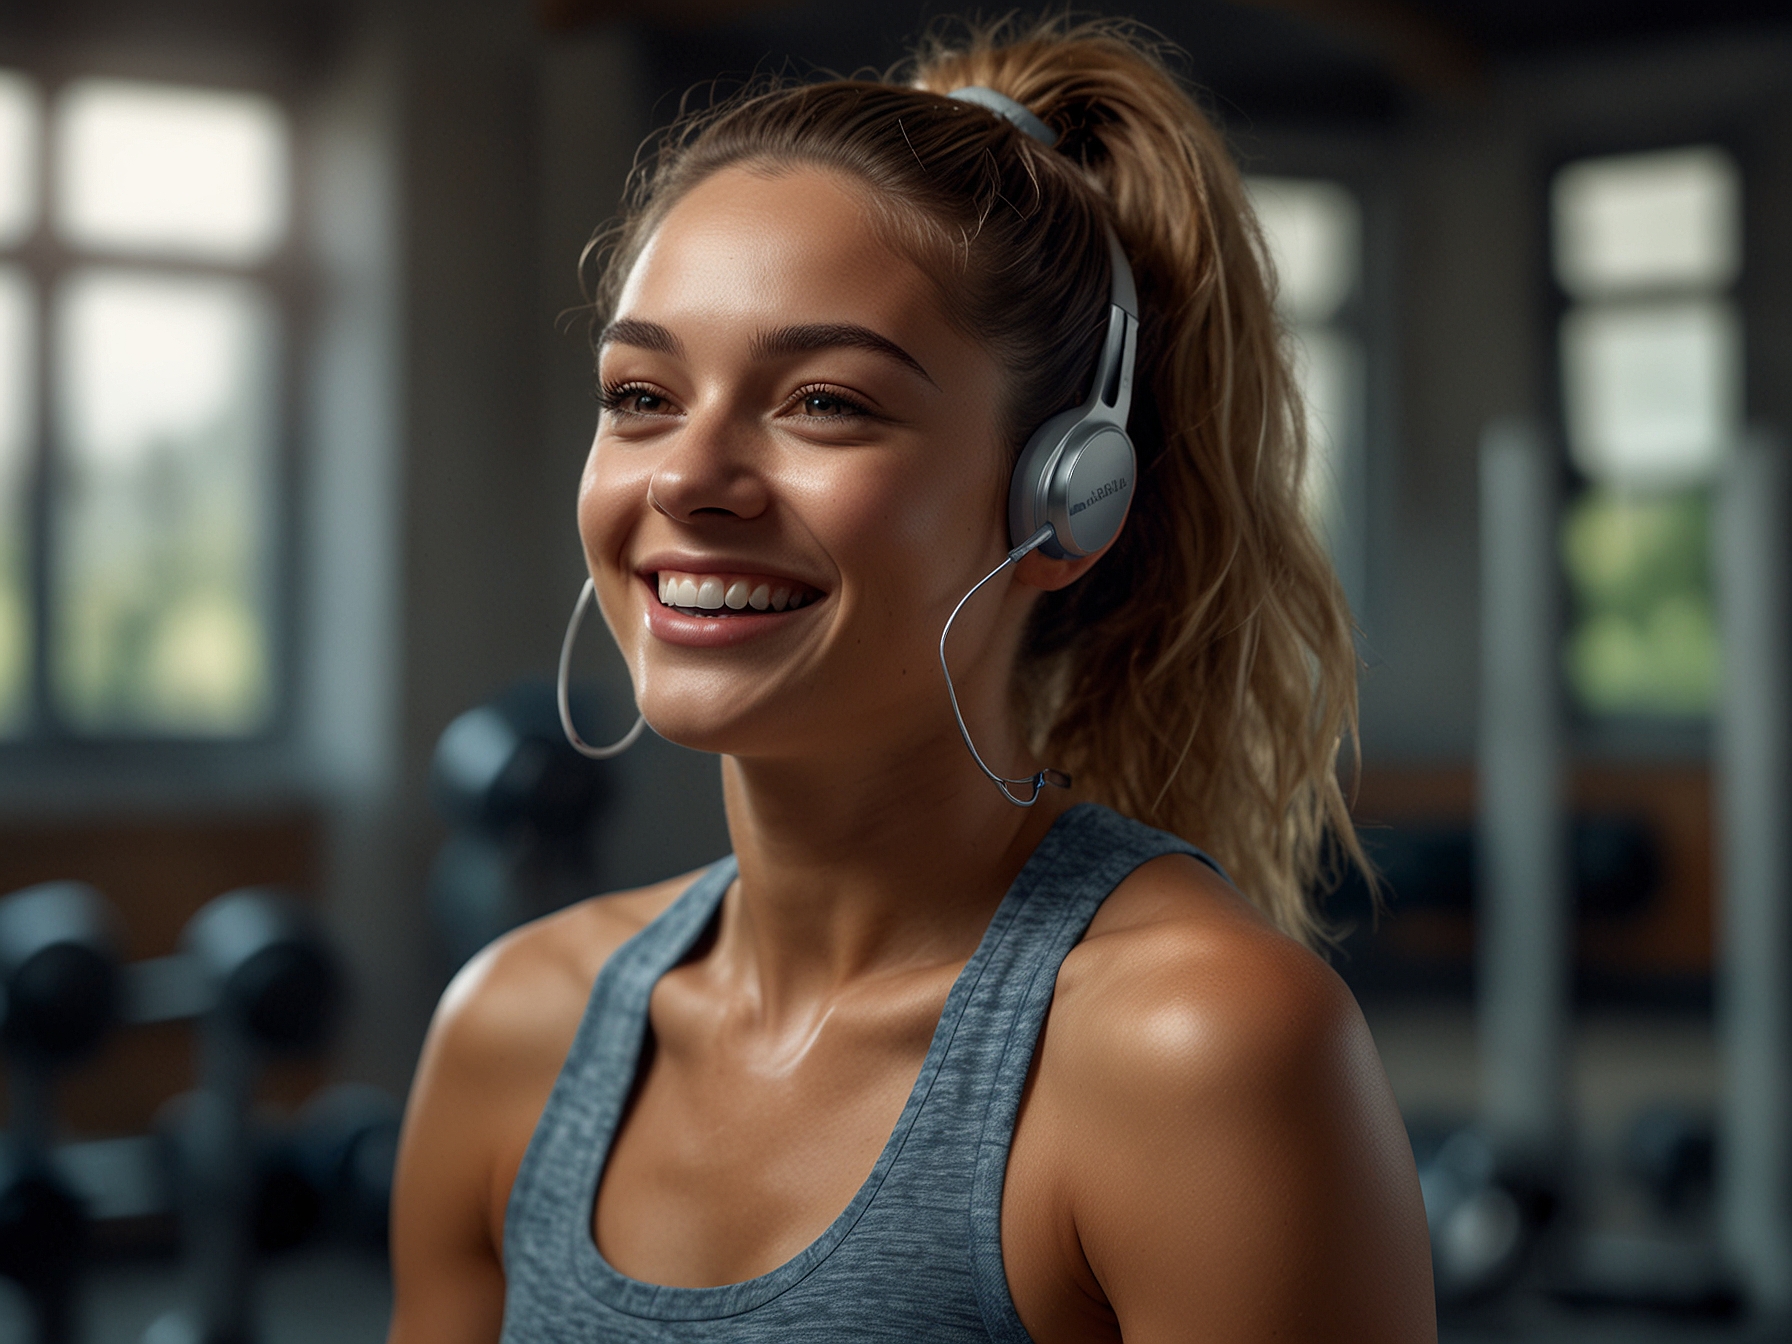 A happy customer using Samsung Galaxy earbuds during a workout session, emphasizing the earbuds' comfortable fit and noise-cancelling feature that enhances focused and uninterrupted listening.